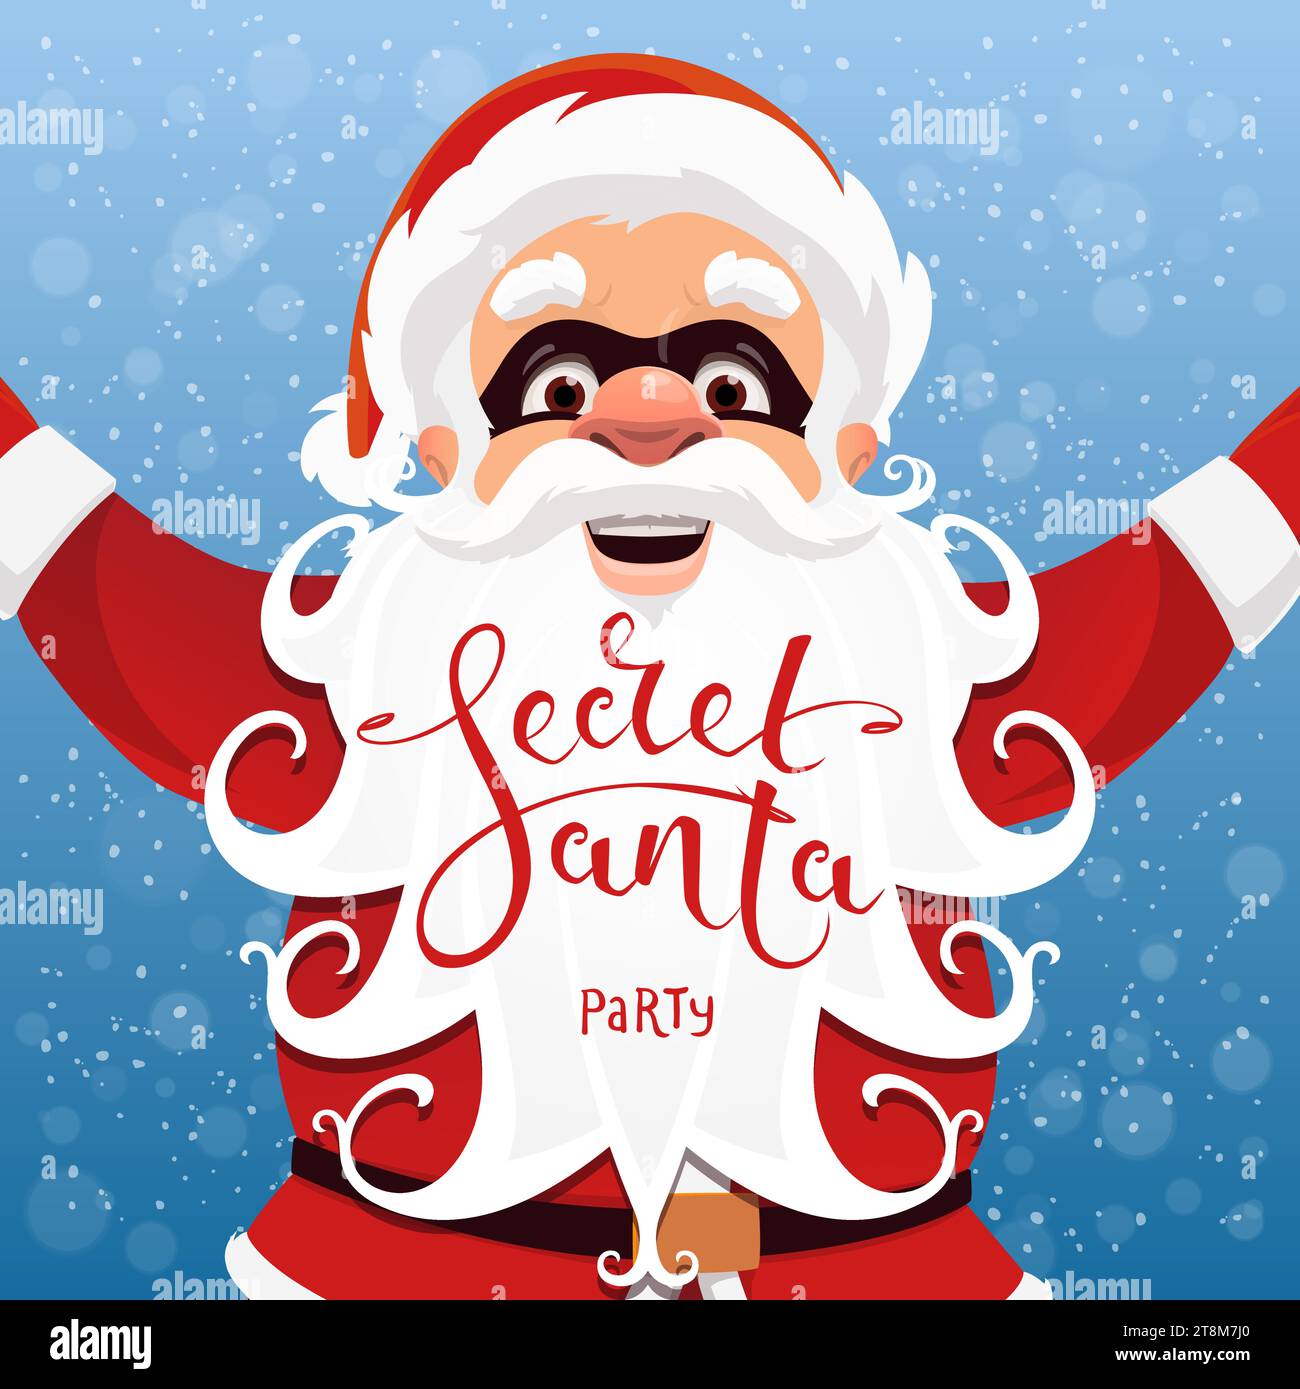 Secret Santa character with white beard and black mask vector poster of Christmas gift giving party invitation. Cartoon Santa Claus personage, Merry Xmas and happy winter holidays invite card Stock Vector